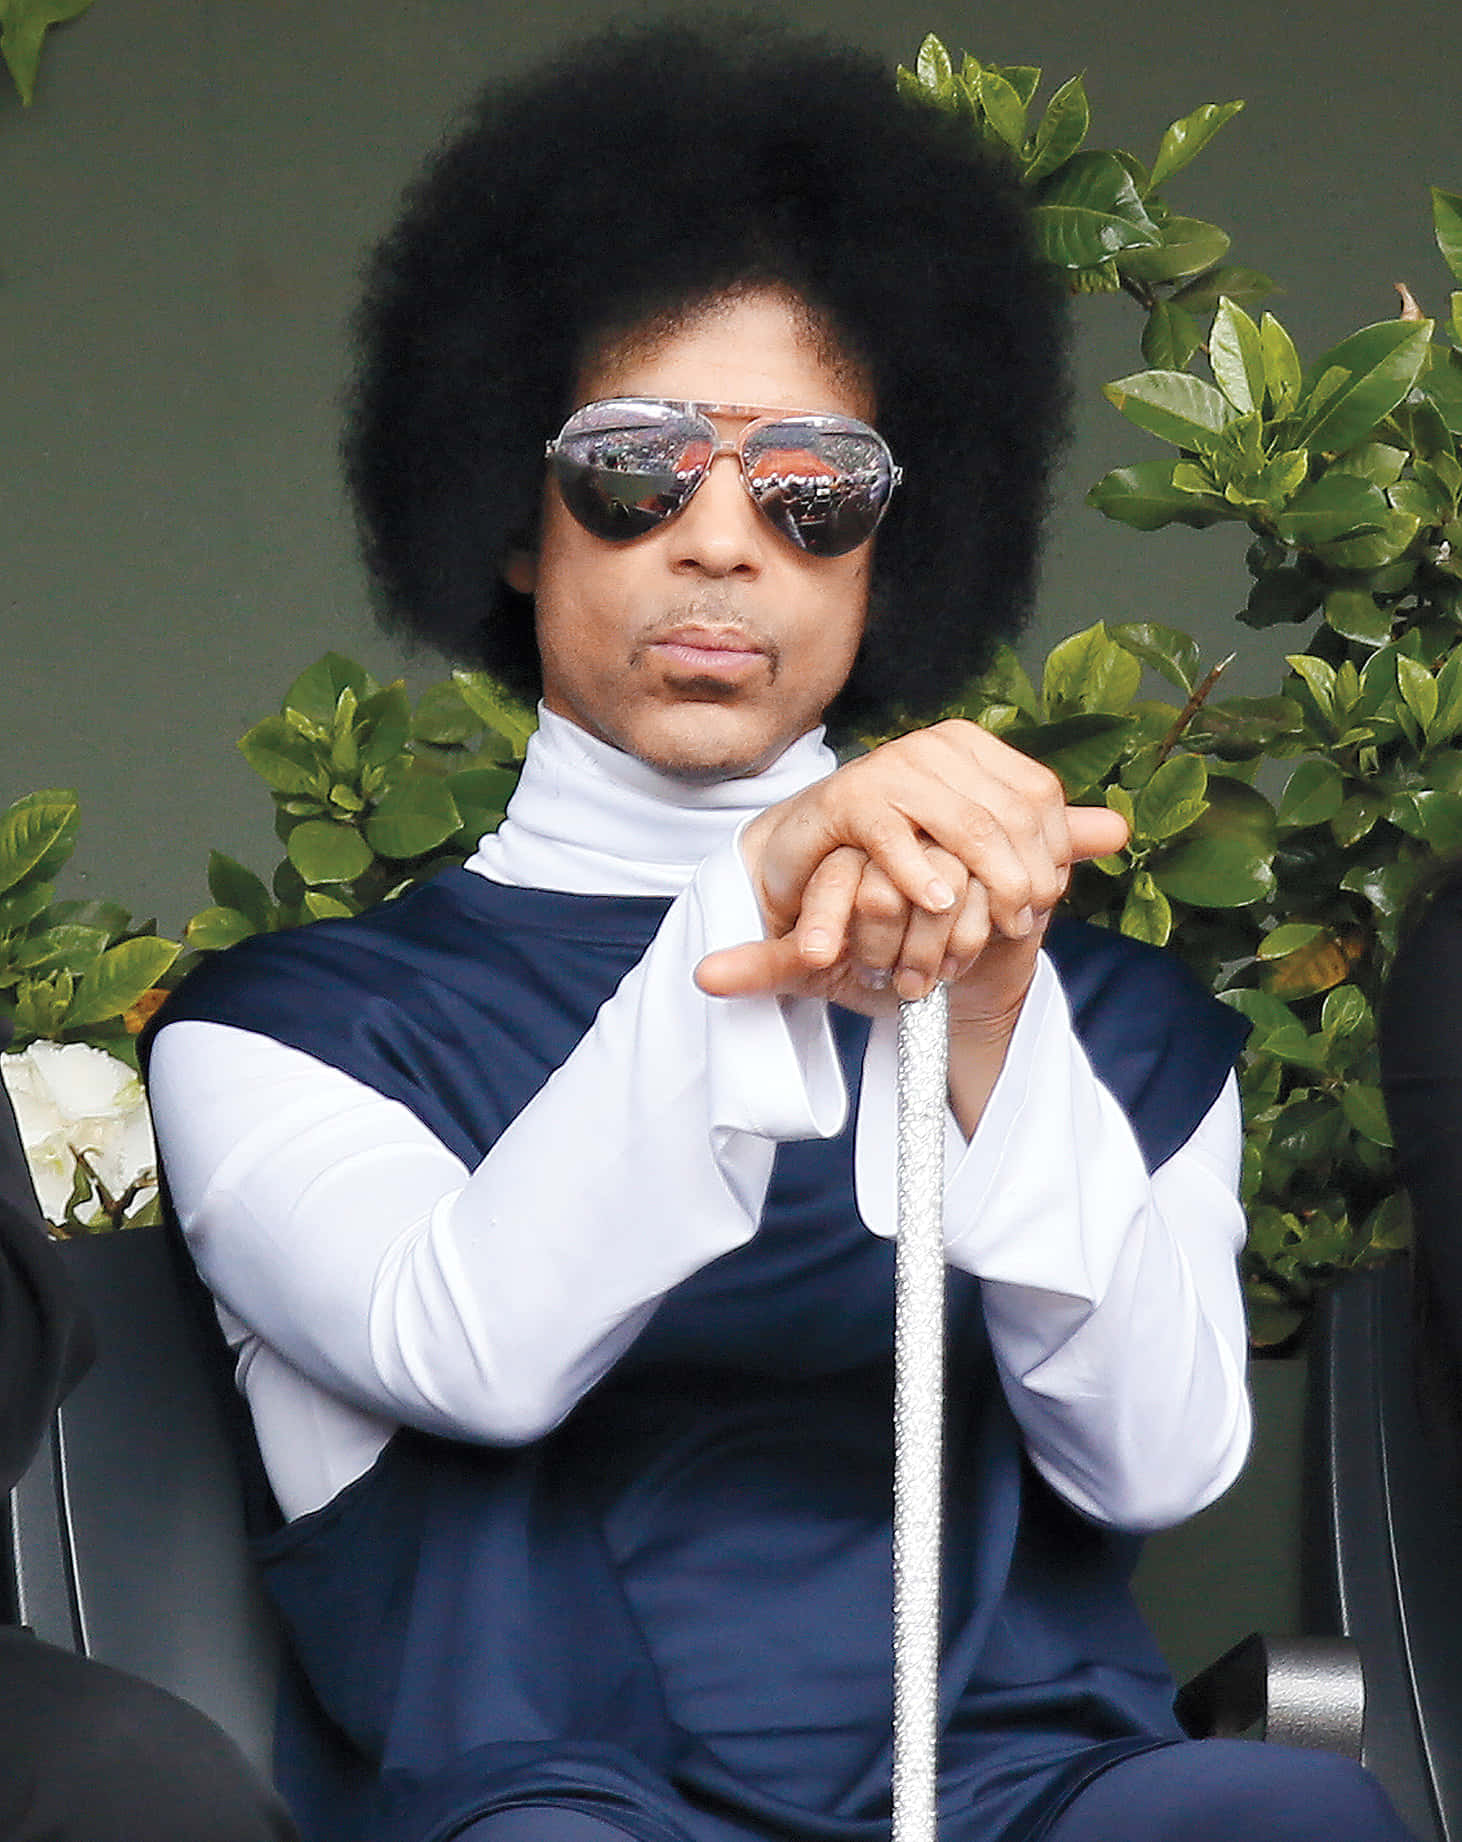 The legendary artist Prince at a concert